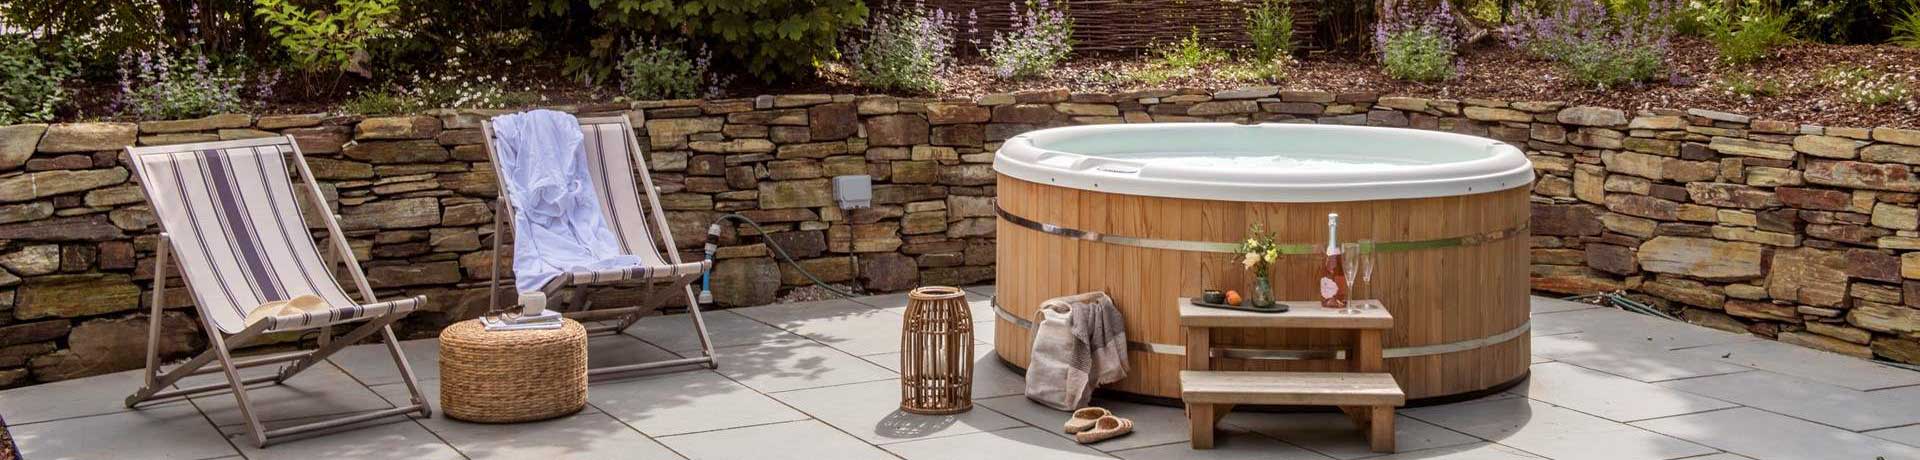 Best holiday cottages with hot tubs